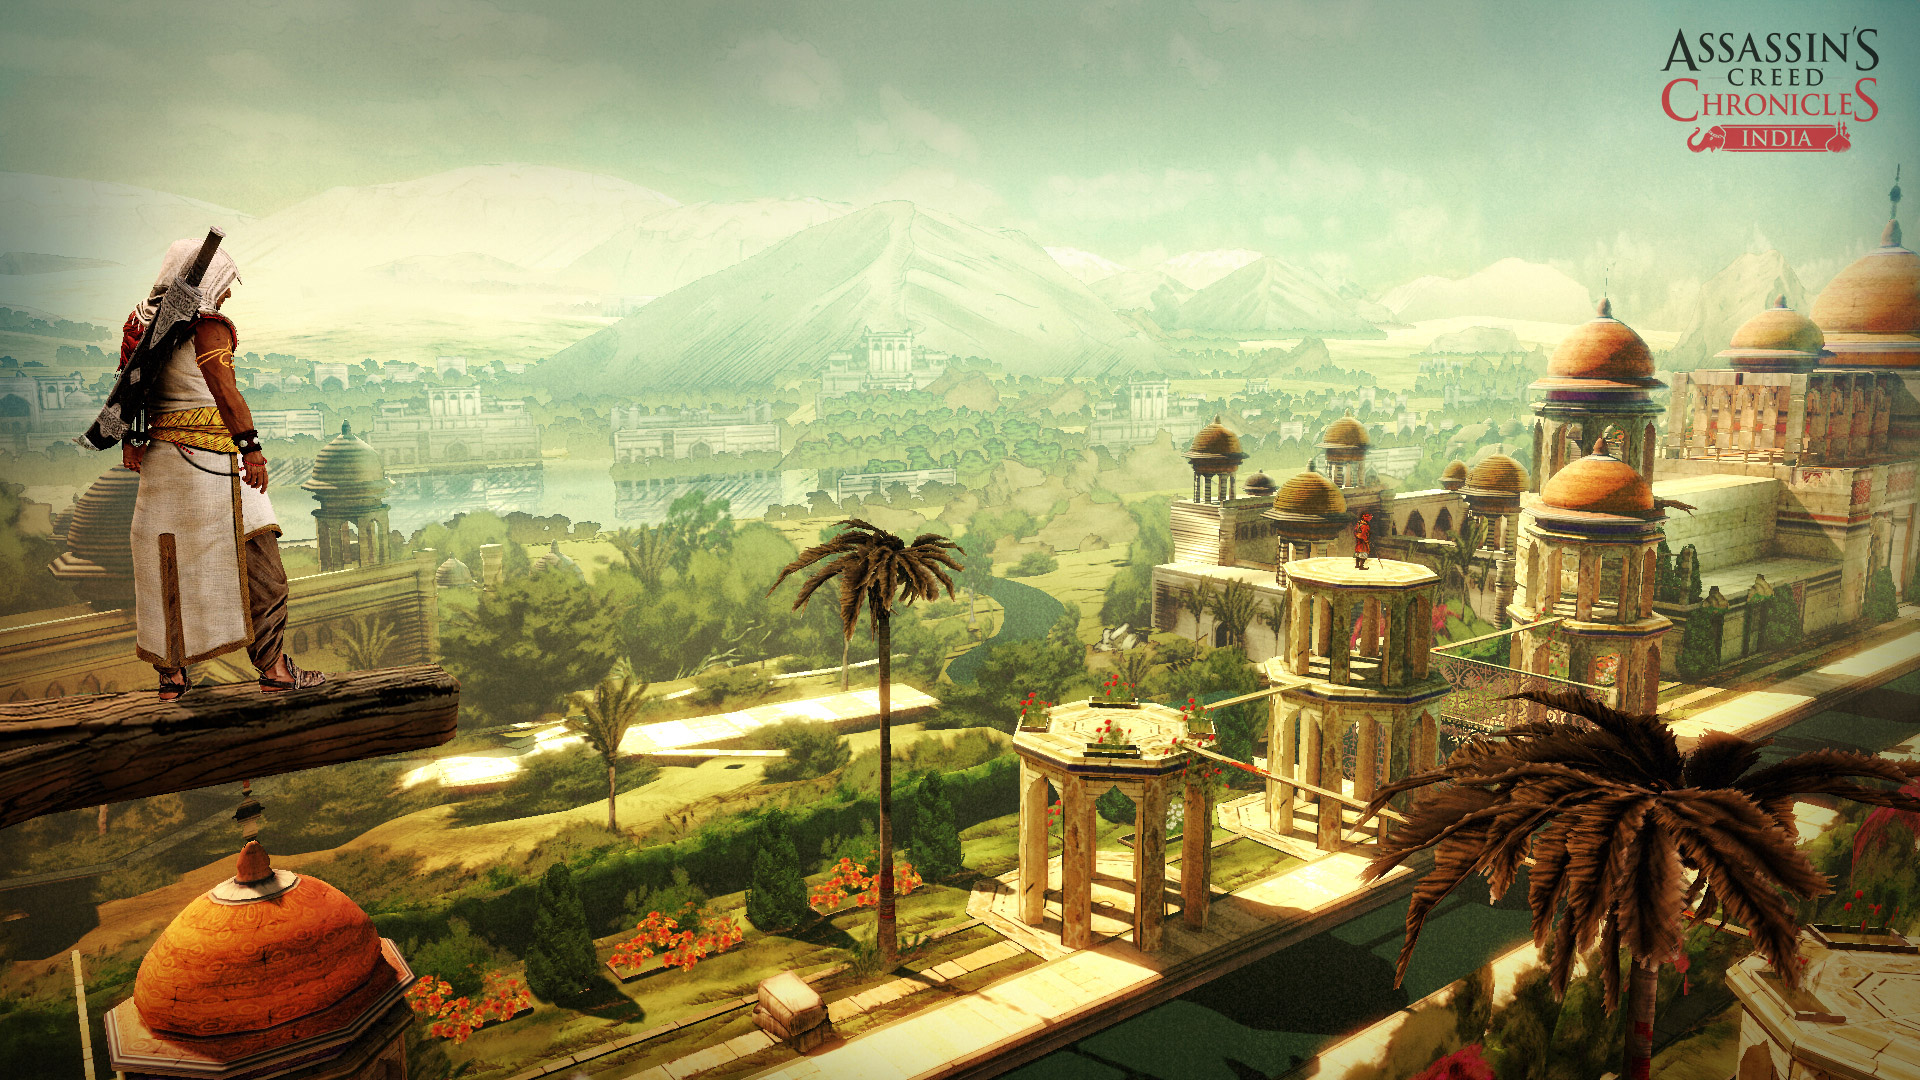 IM1498: Assassin's Creed Chronicles: India